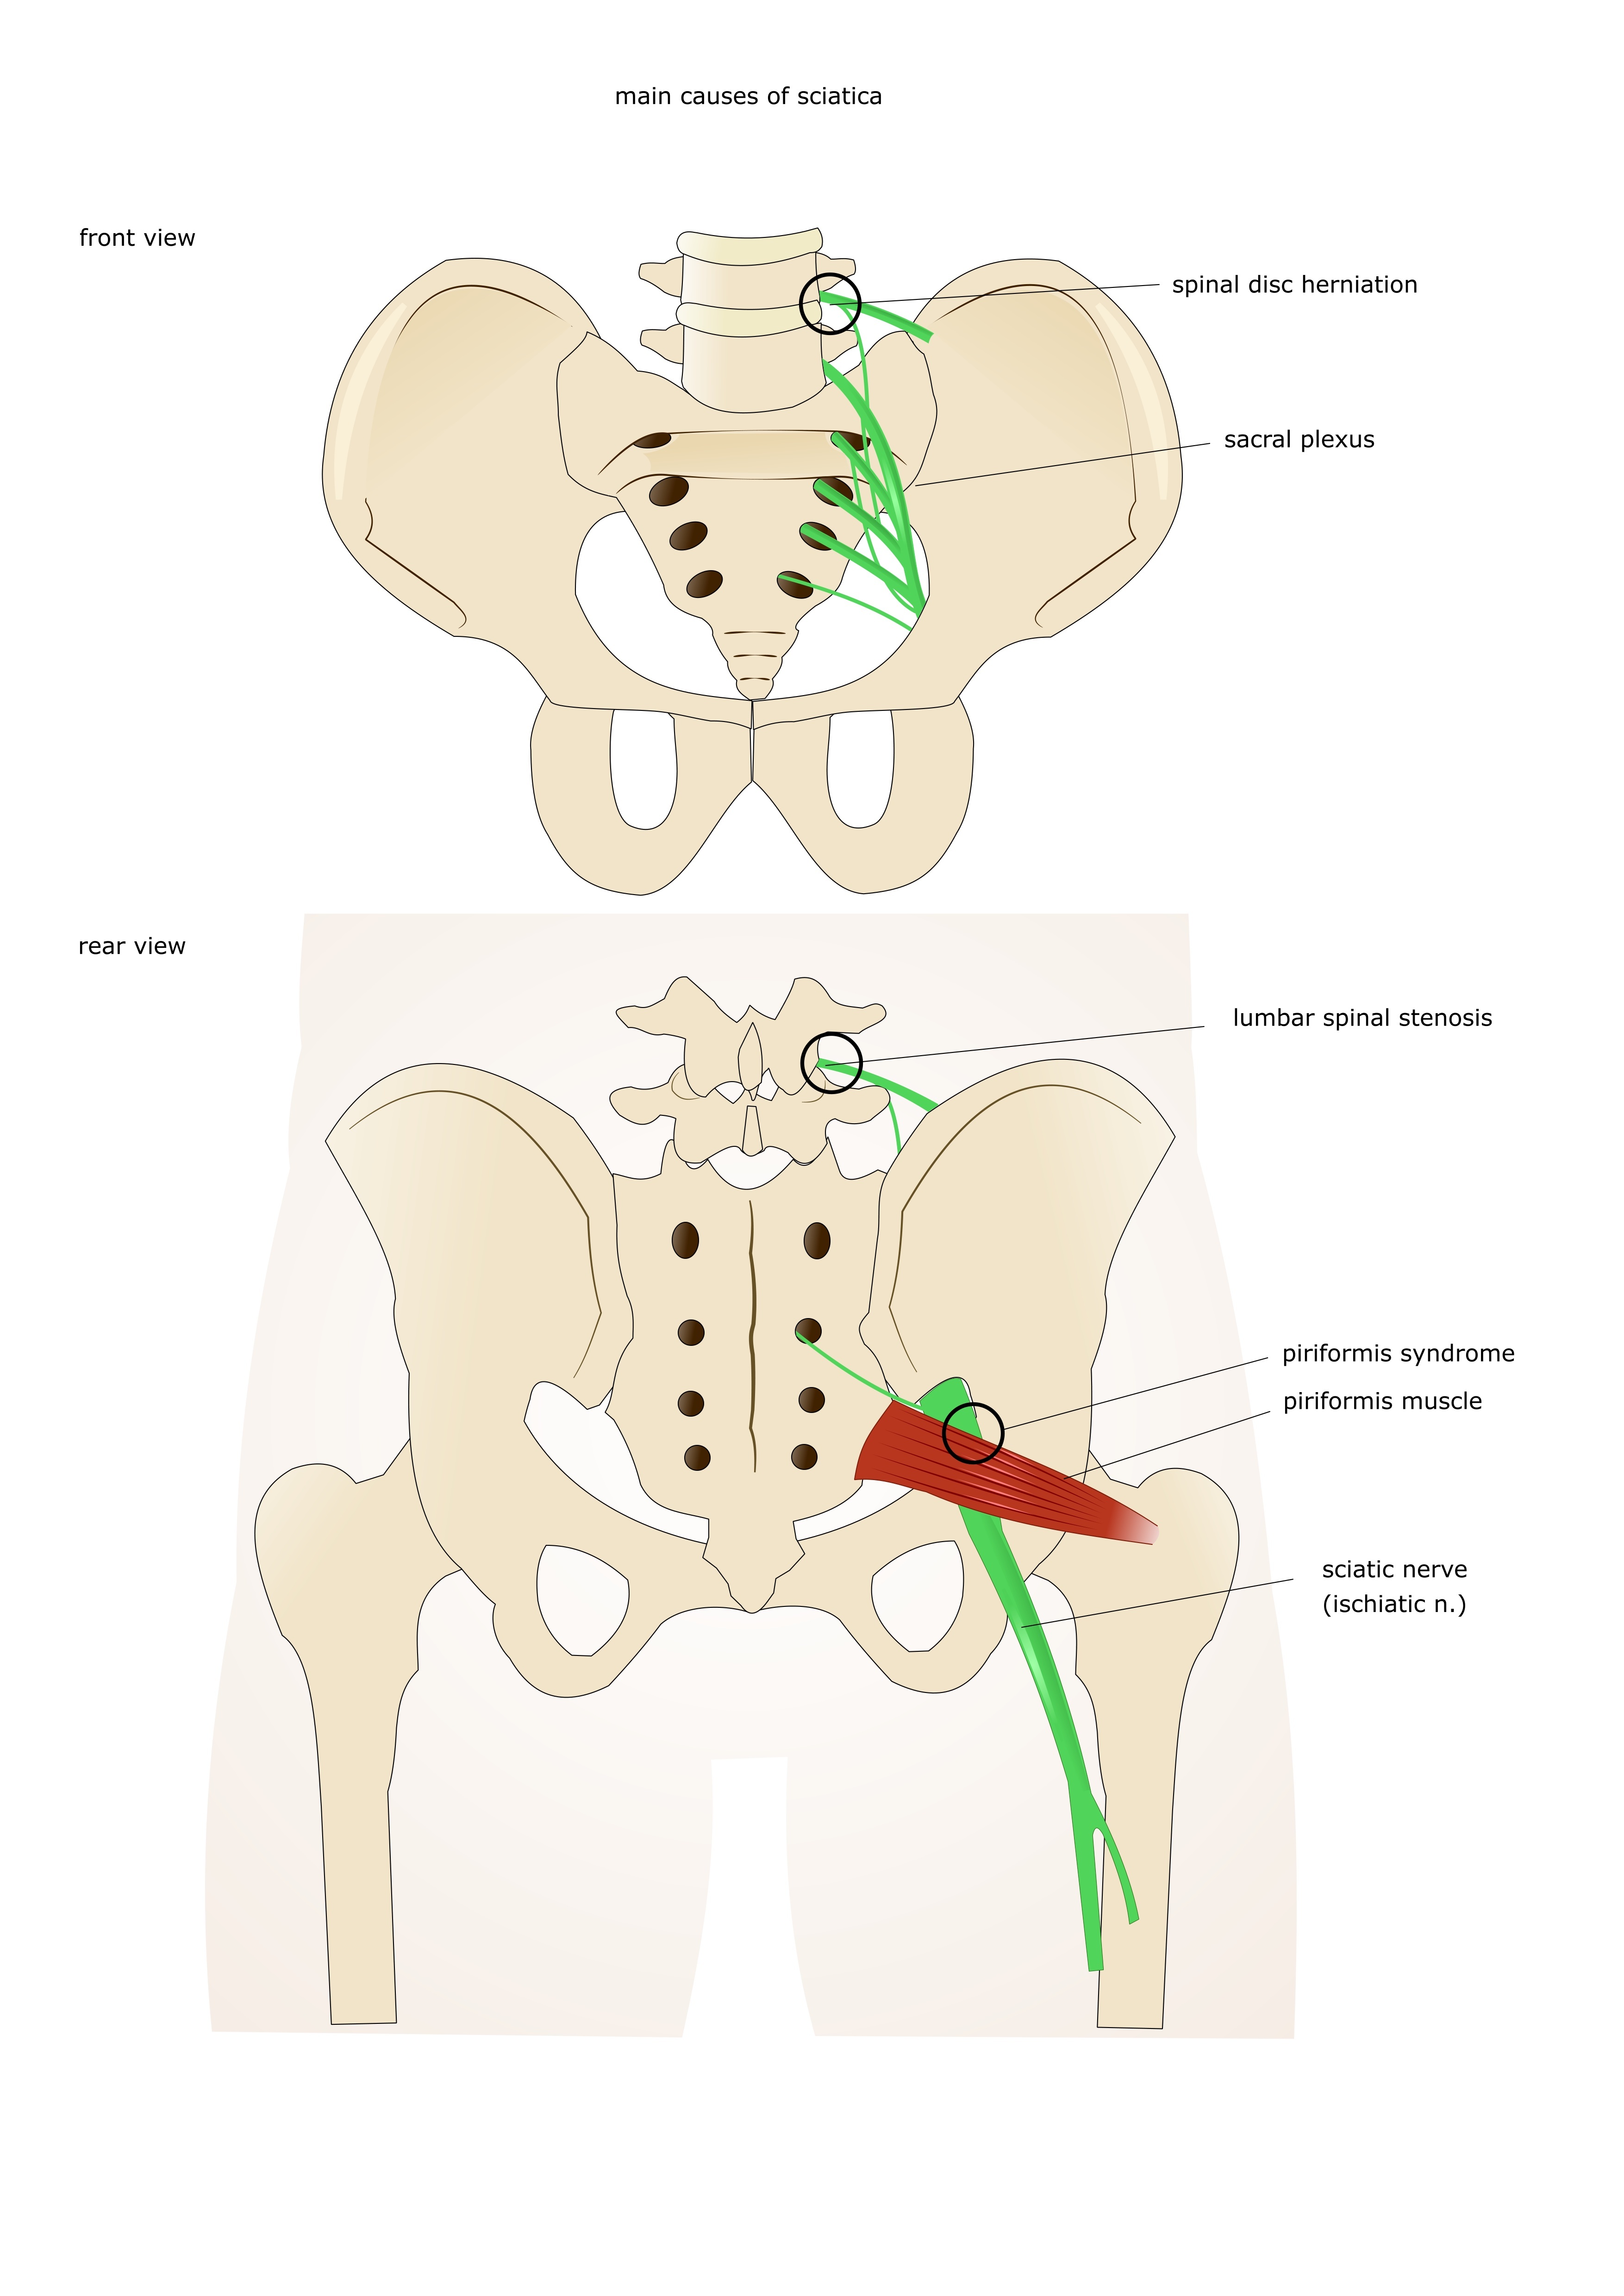 Piriformis Syndrome: How to detect it and strengthening and stretching  programs to help you heal - Runners Connect